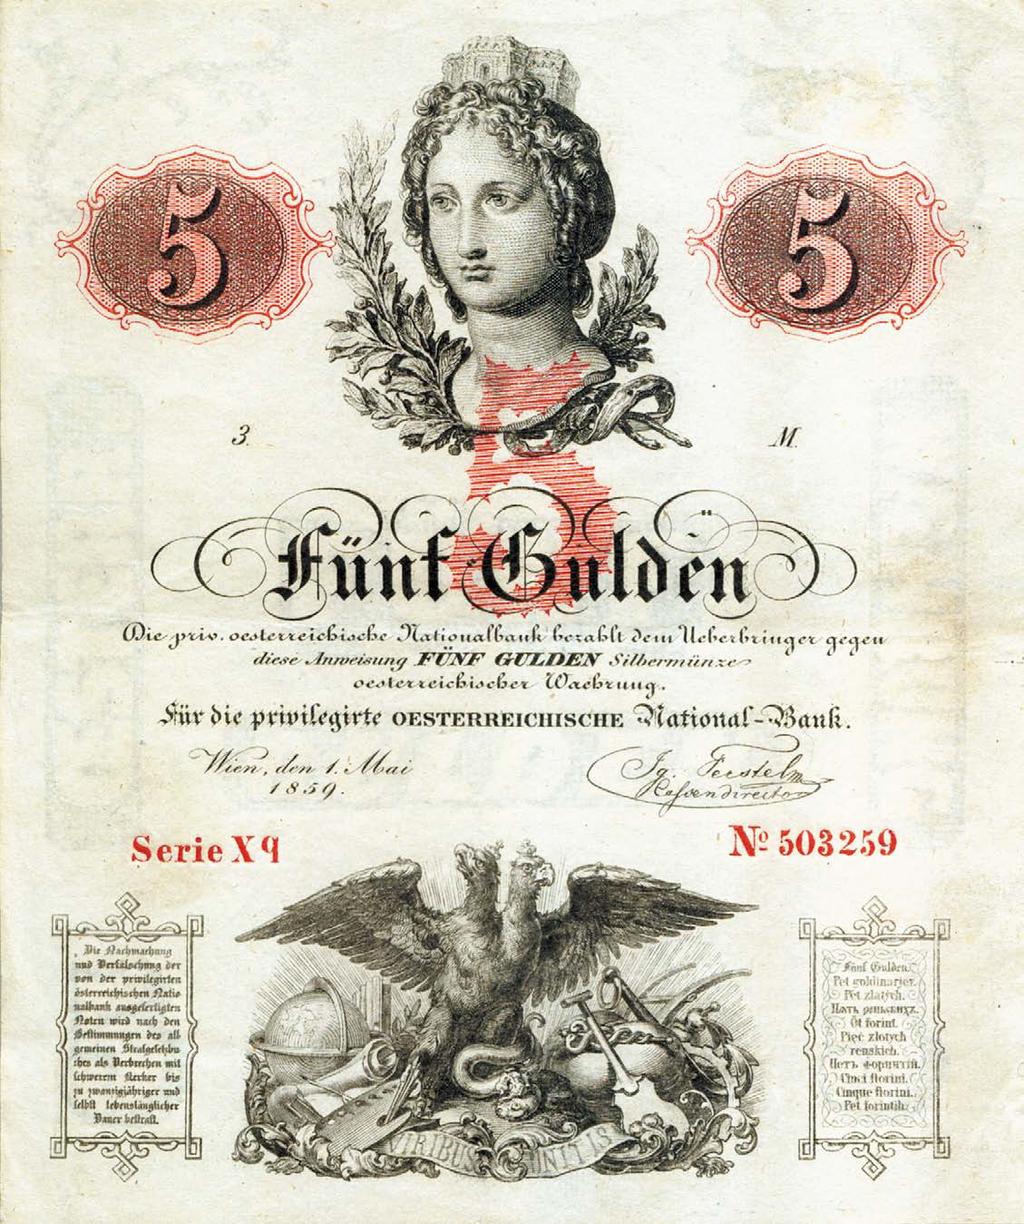 tenders, vouchers, tokens and pre-coin types of legal tender) and their historical